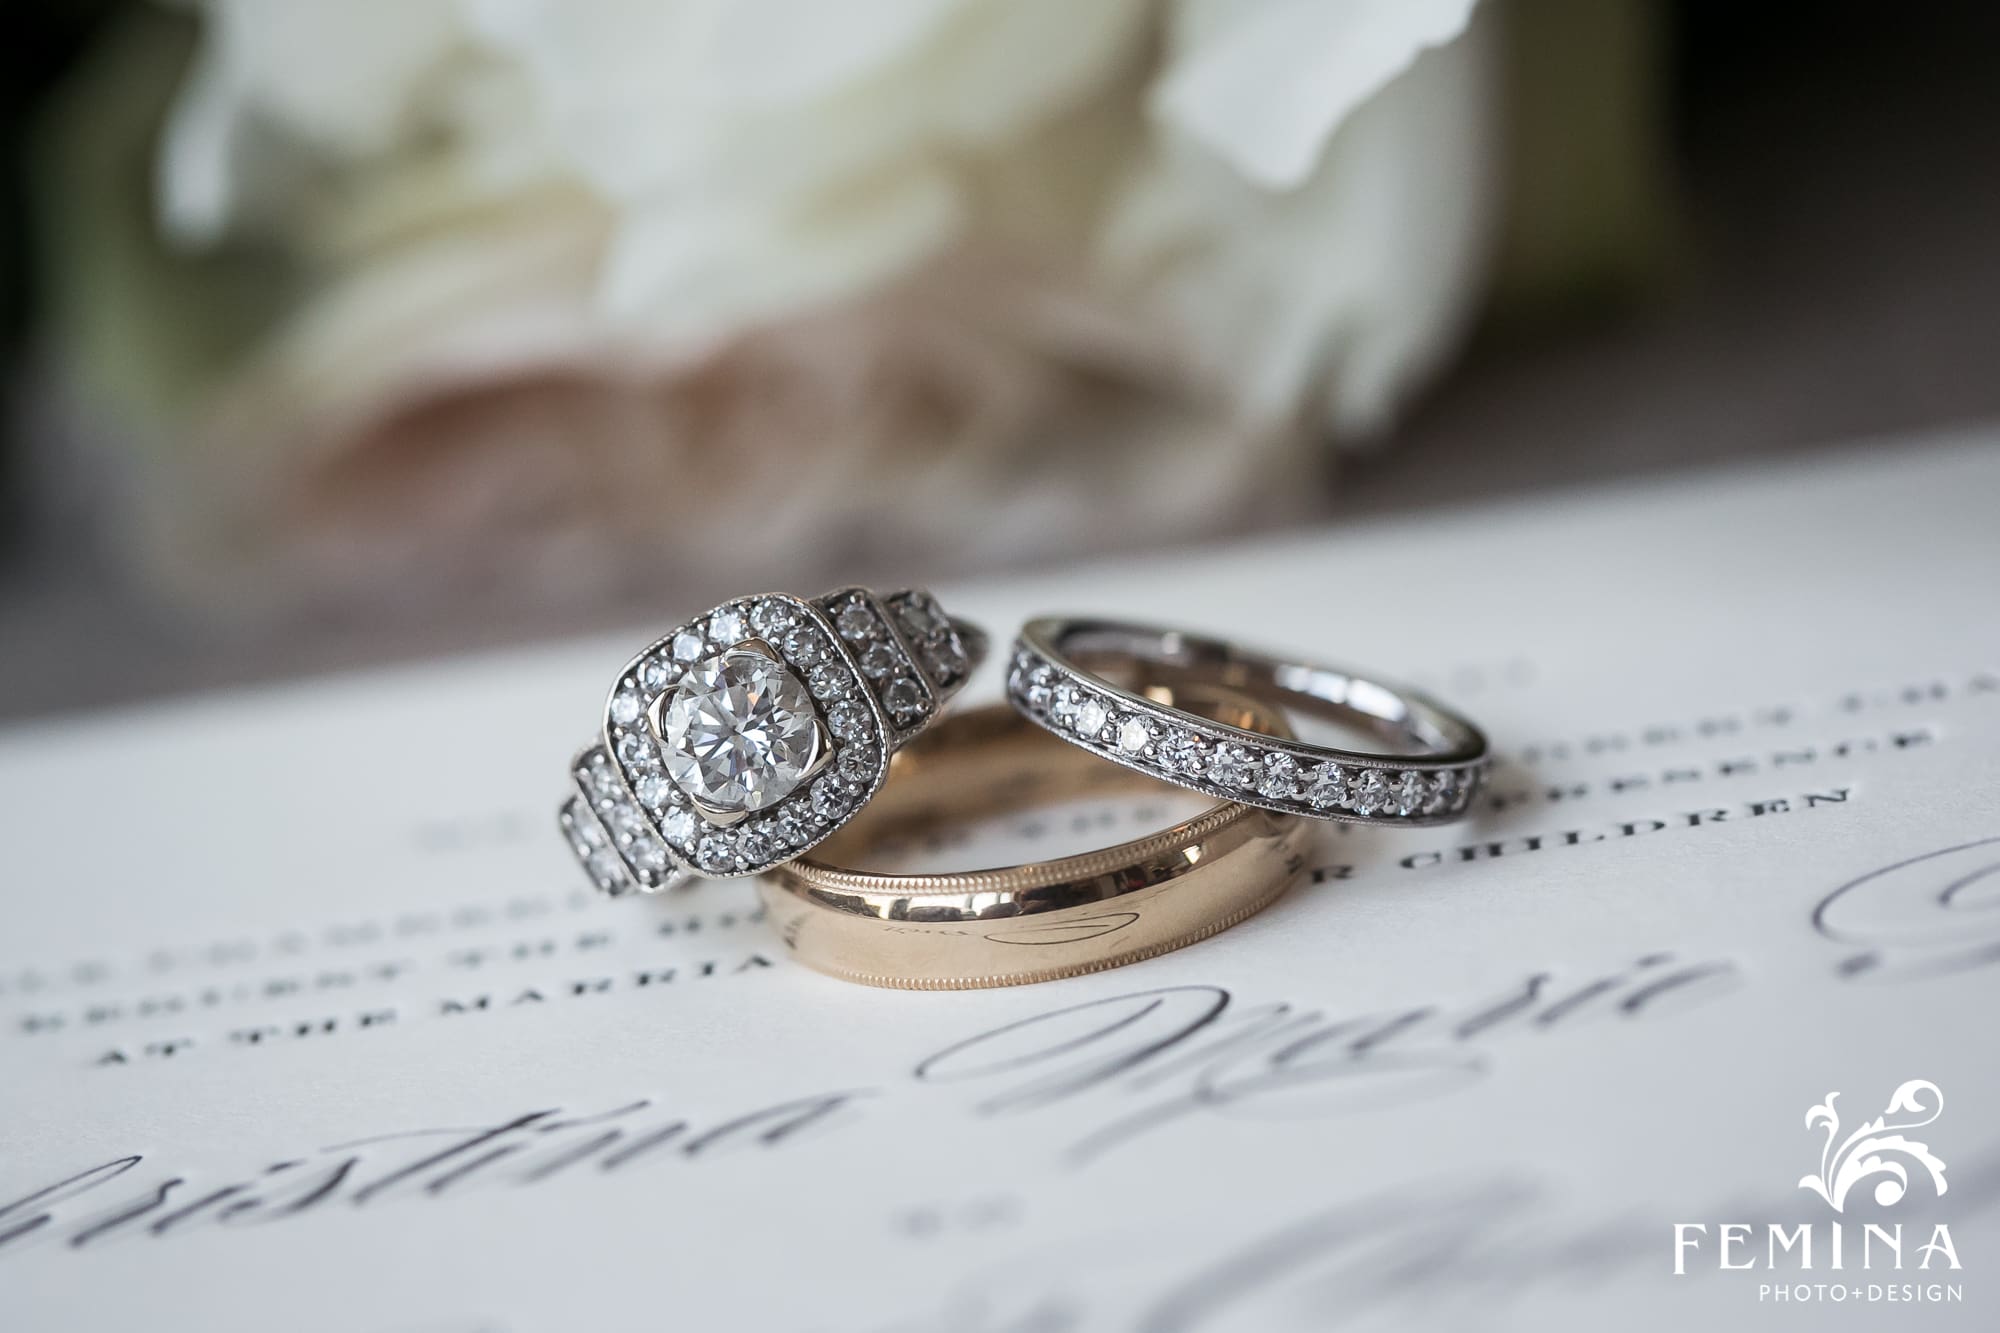 Christina and Ryan's wedding rings photographed with their invitation at NYLO